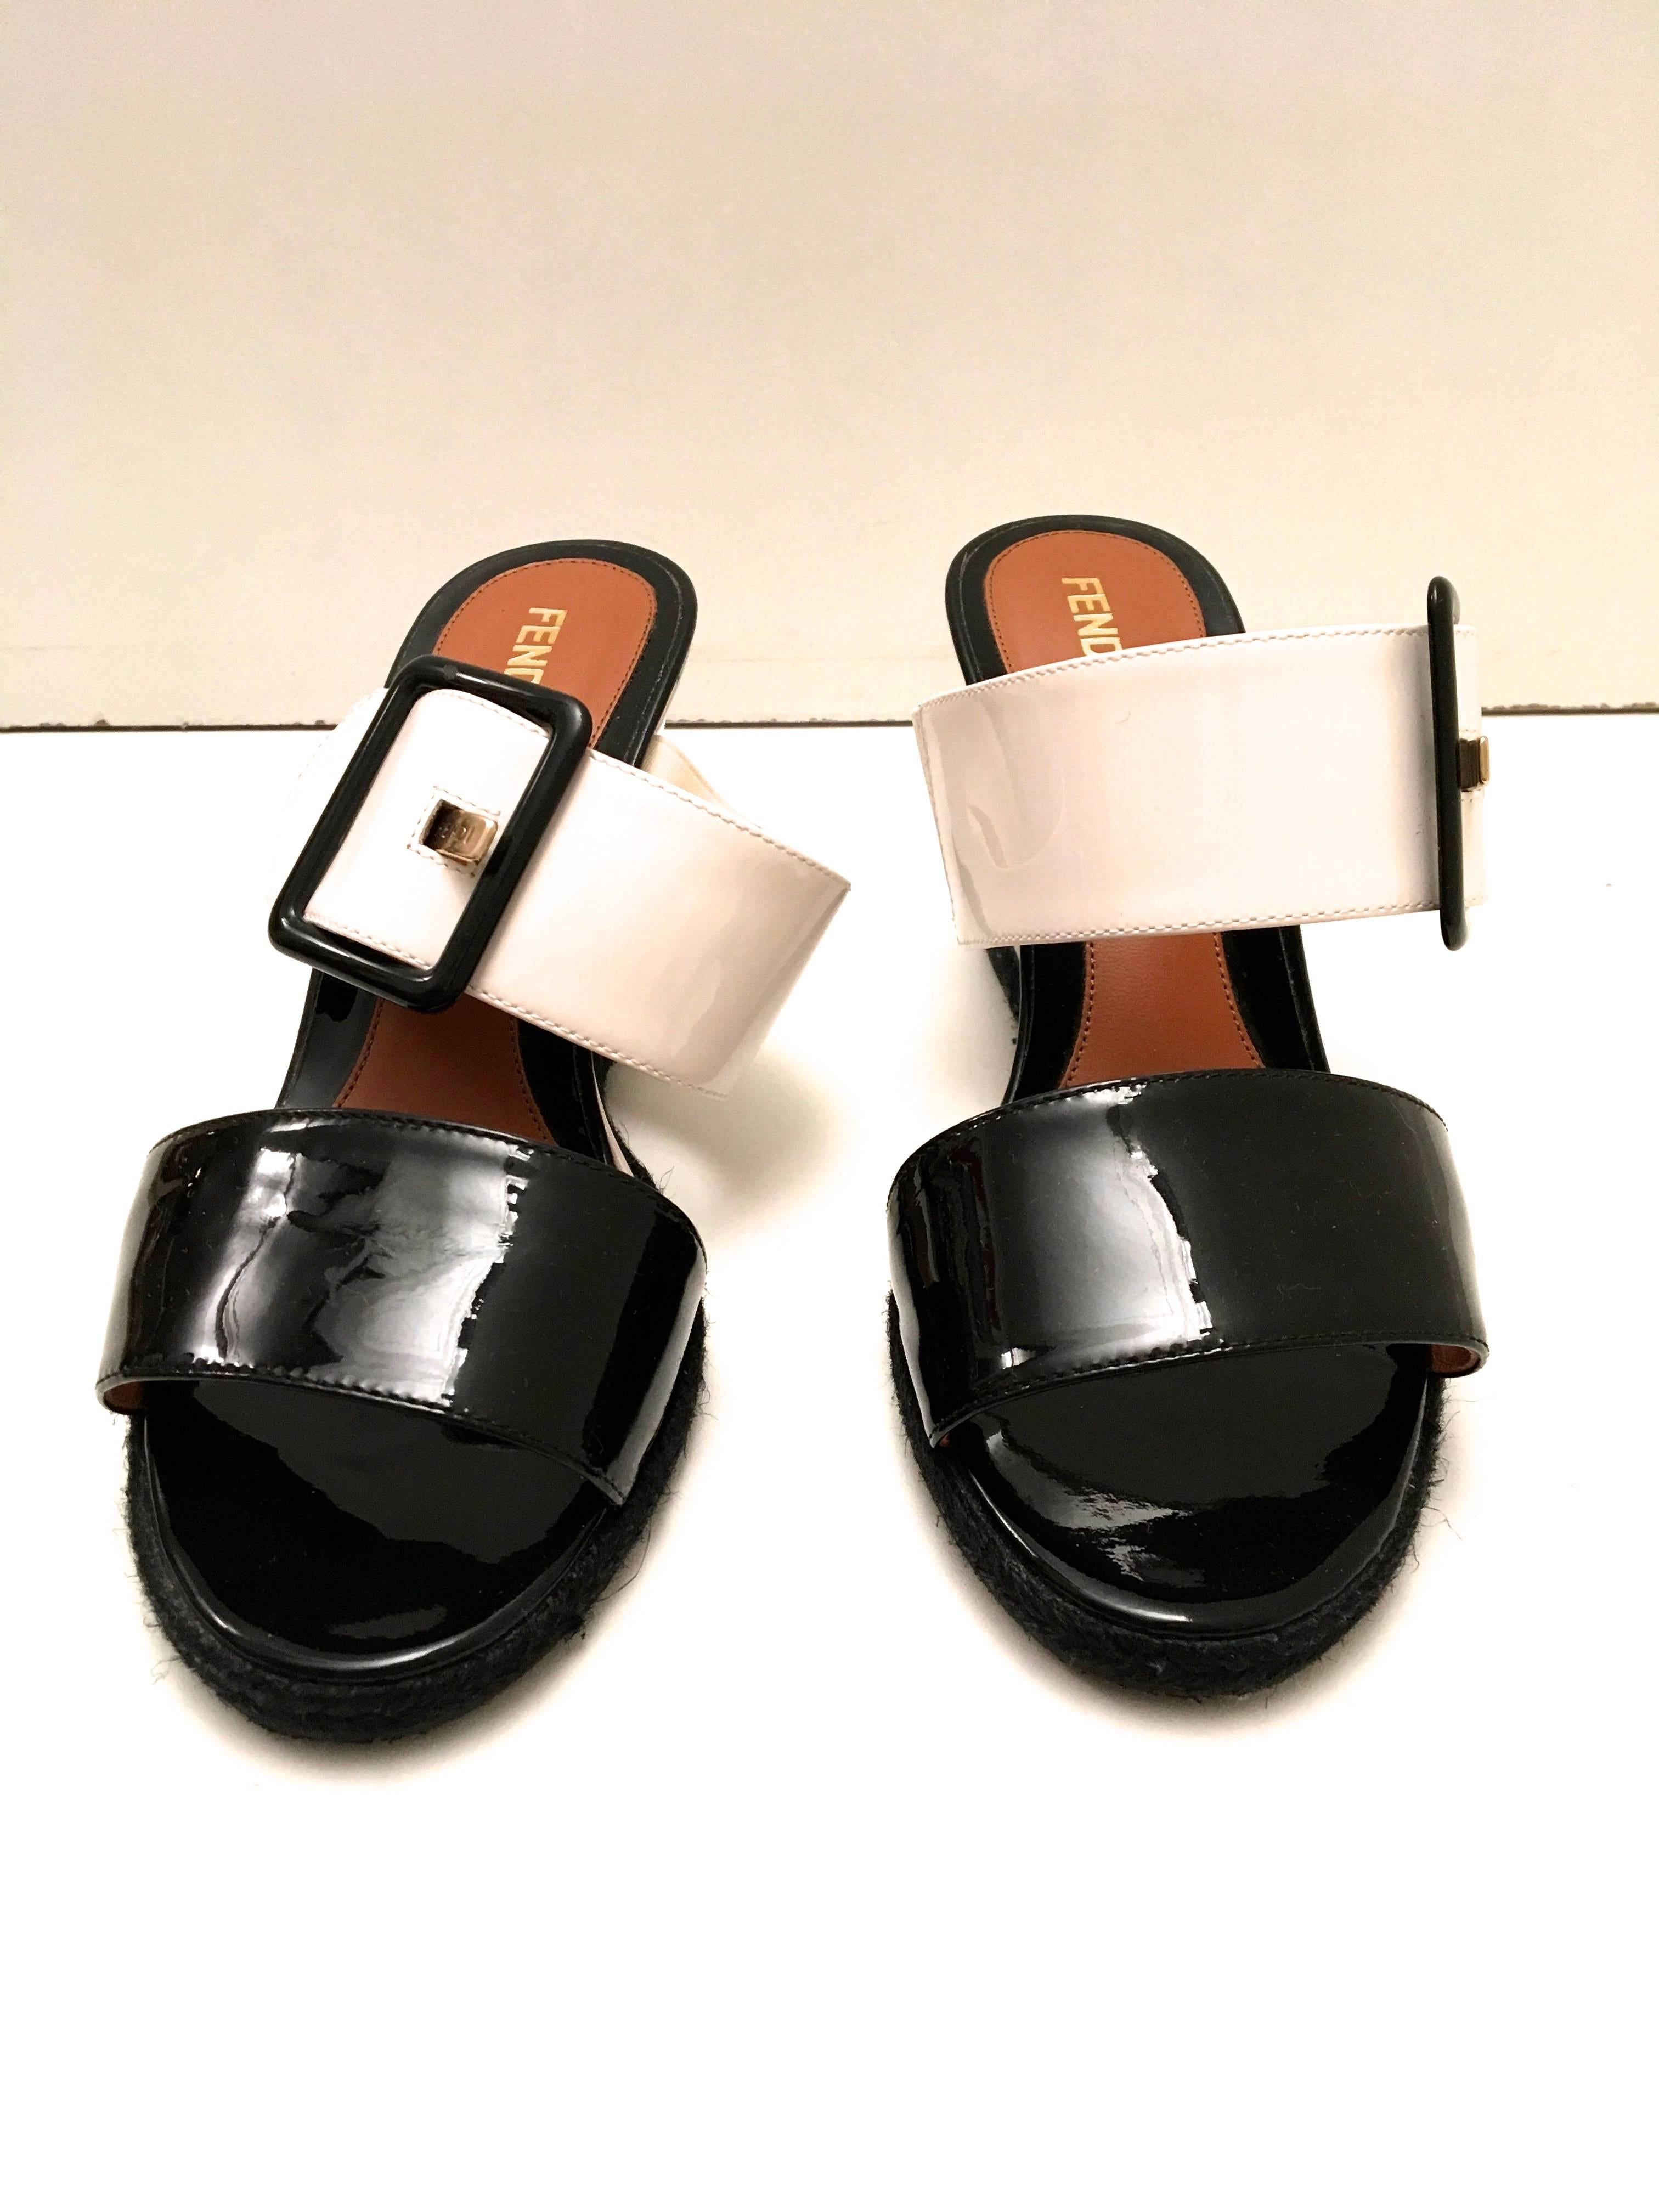 Fendi Patent Leather Wedges - Black and White - Size 37.5 For Sale 2